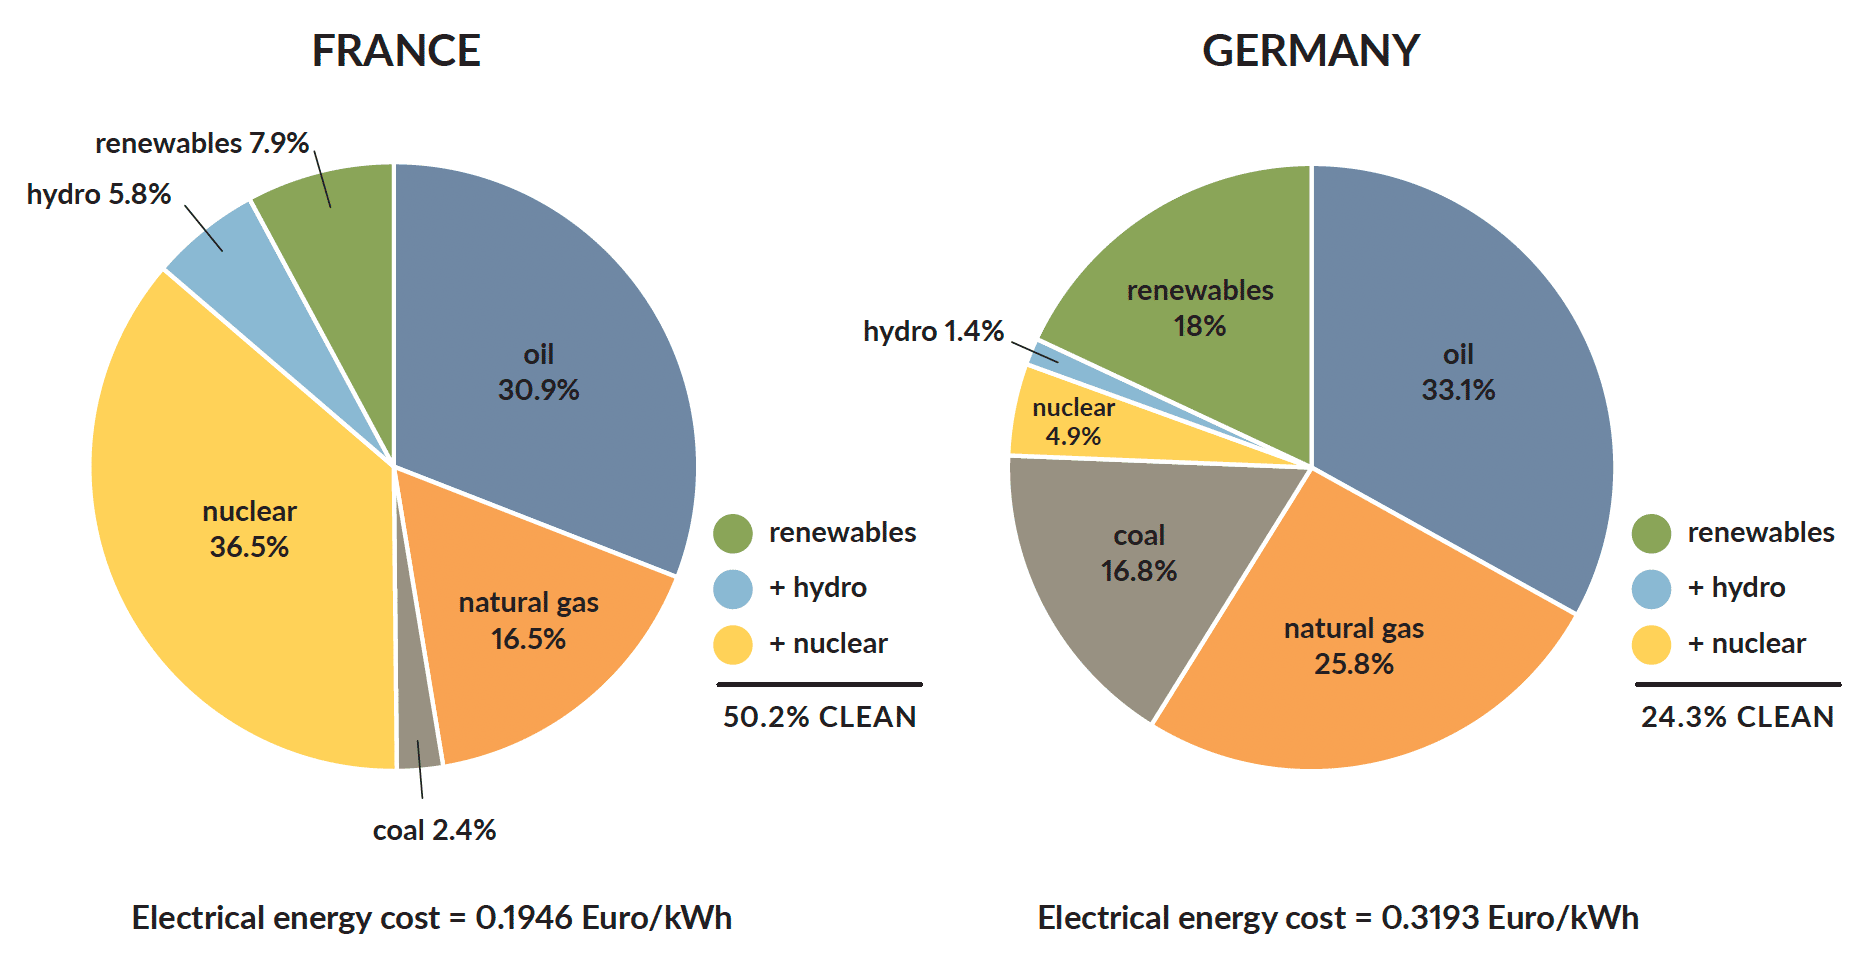 Comparison of energy consumption between France and Germany in percent